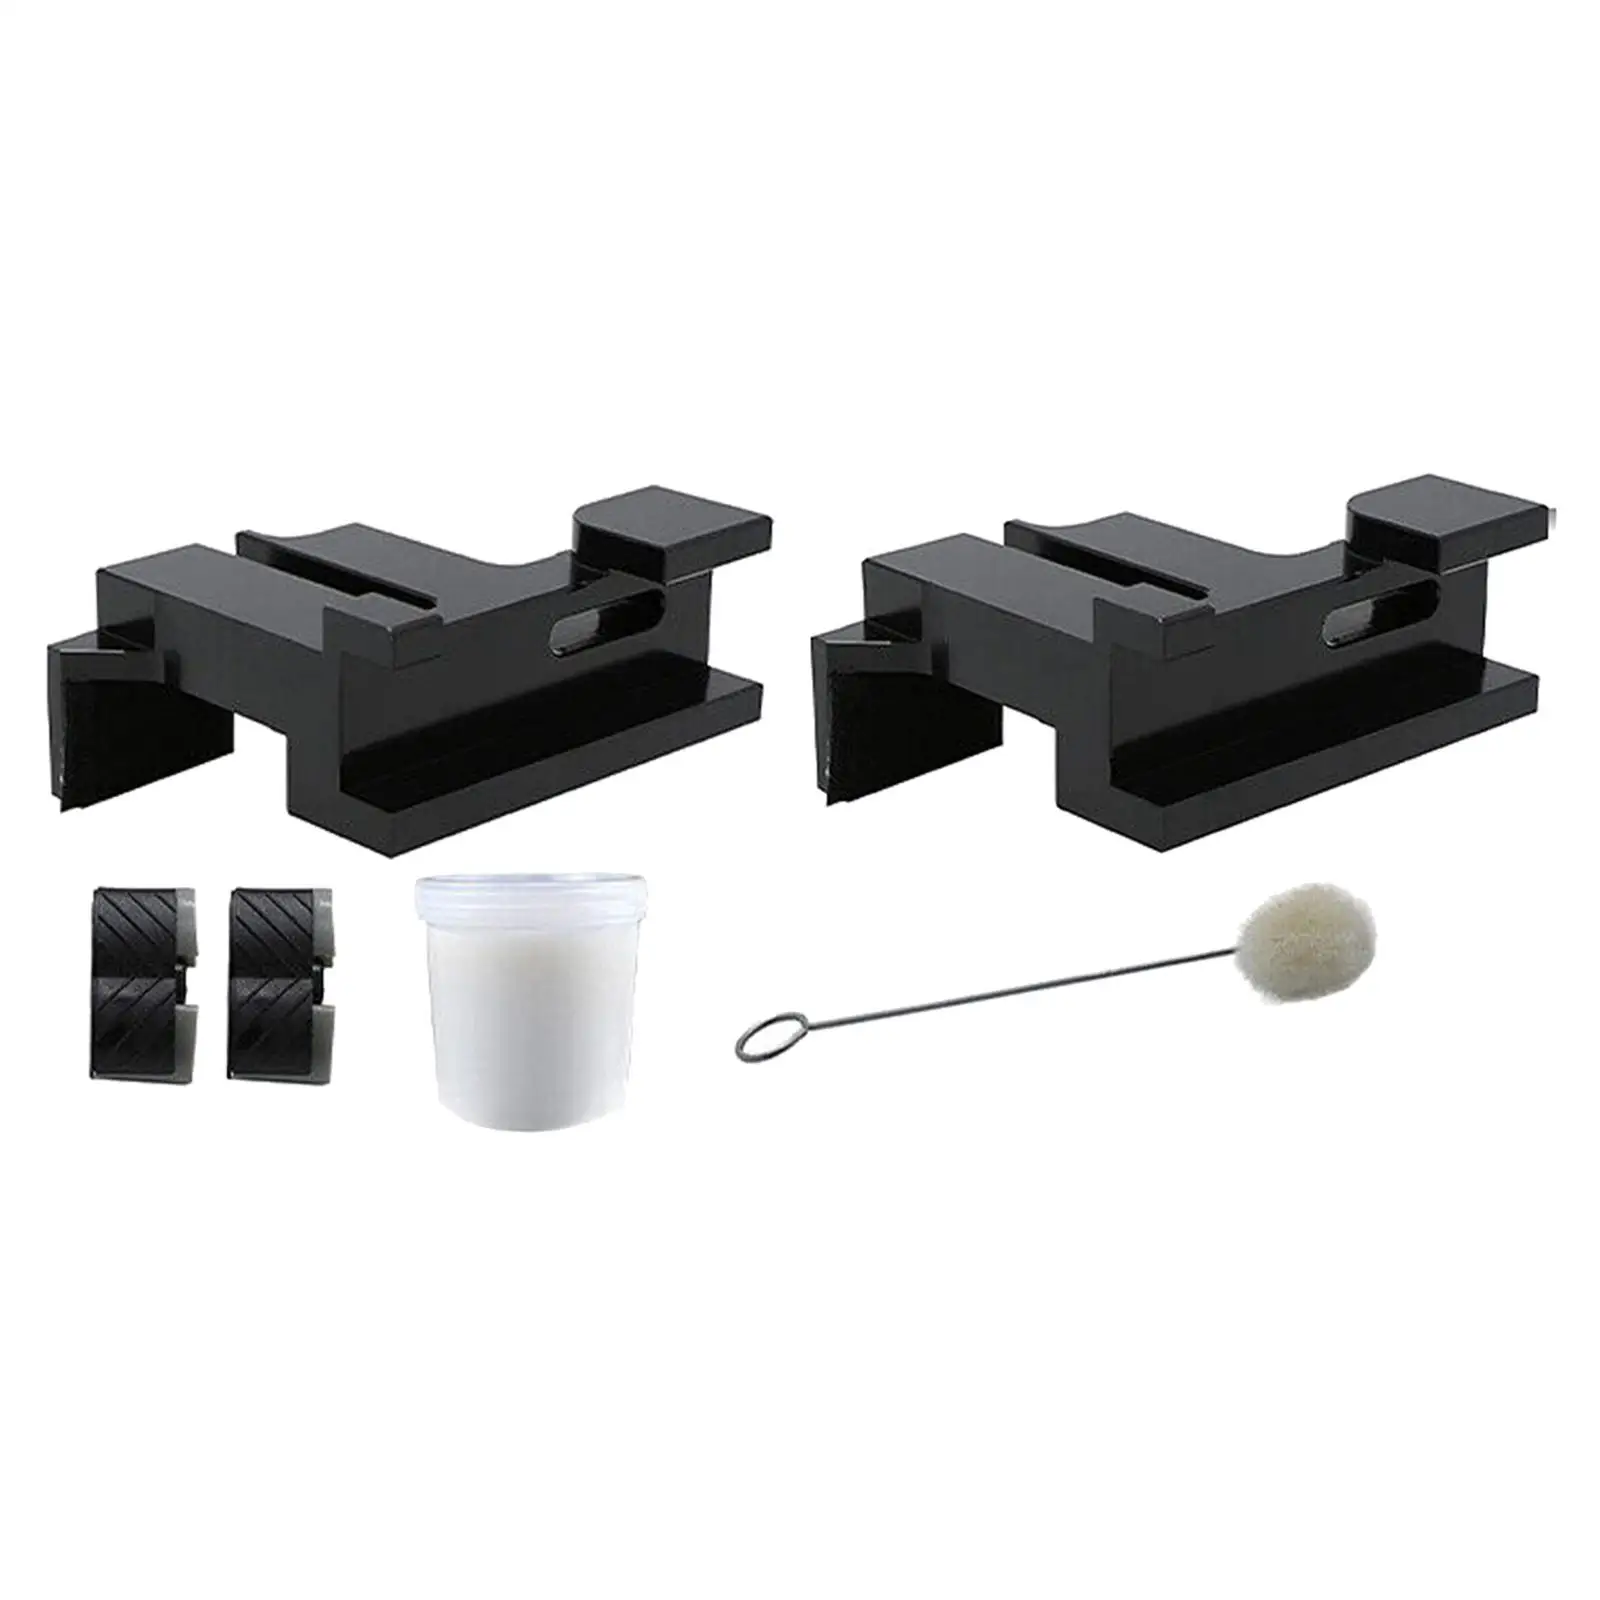 Sunroof Track Repair Set Durable Easy to Install Sunroof Rails Repair Set Replacesment Part for Lincoln Mkt (2010-2018)